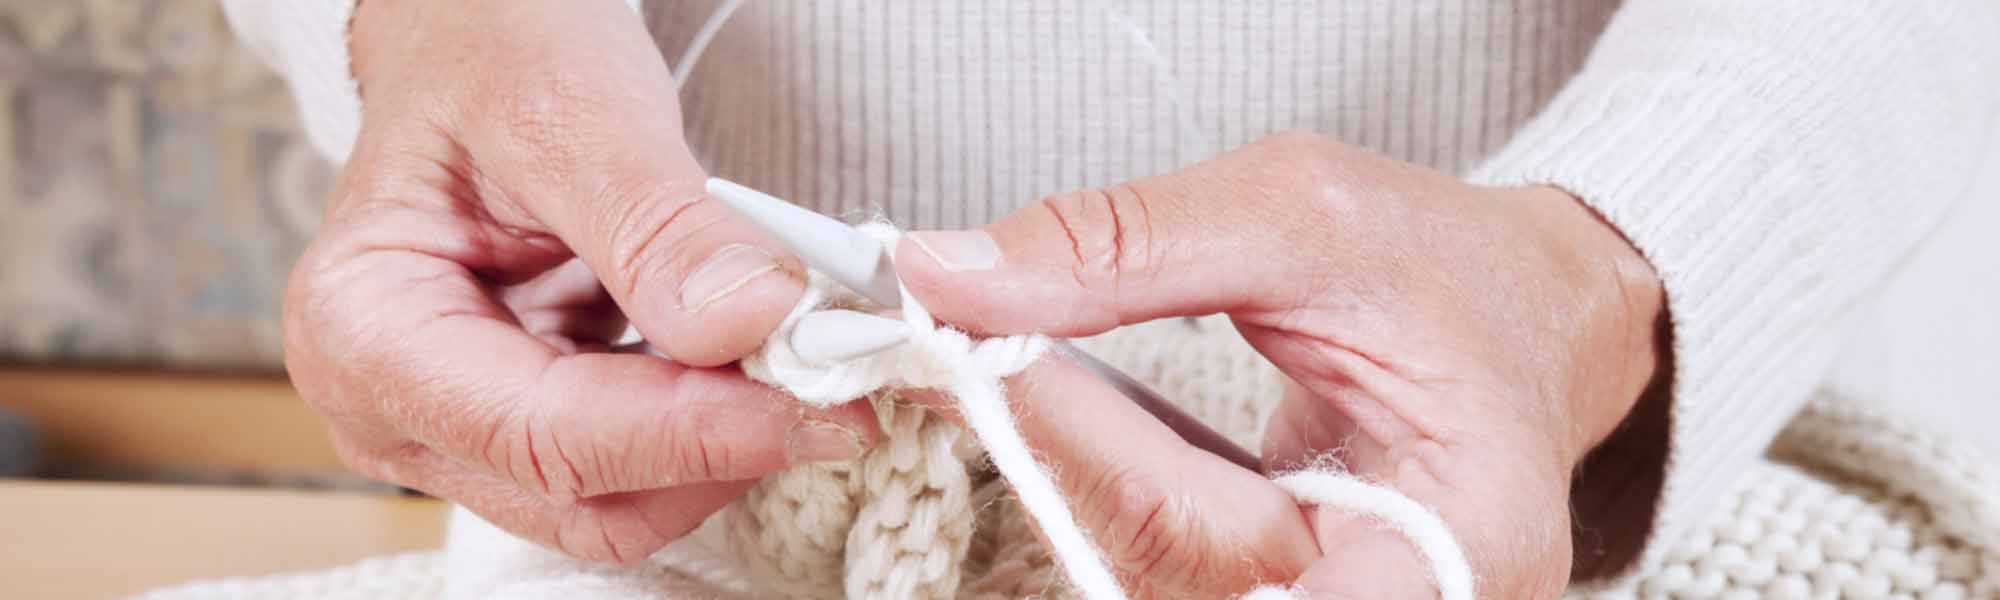 The Best Ergonomic Knitting Needles for Knitters with Arthritis or Hand Pain